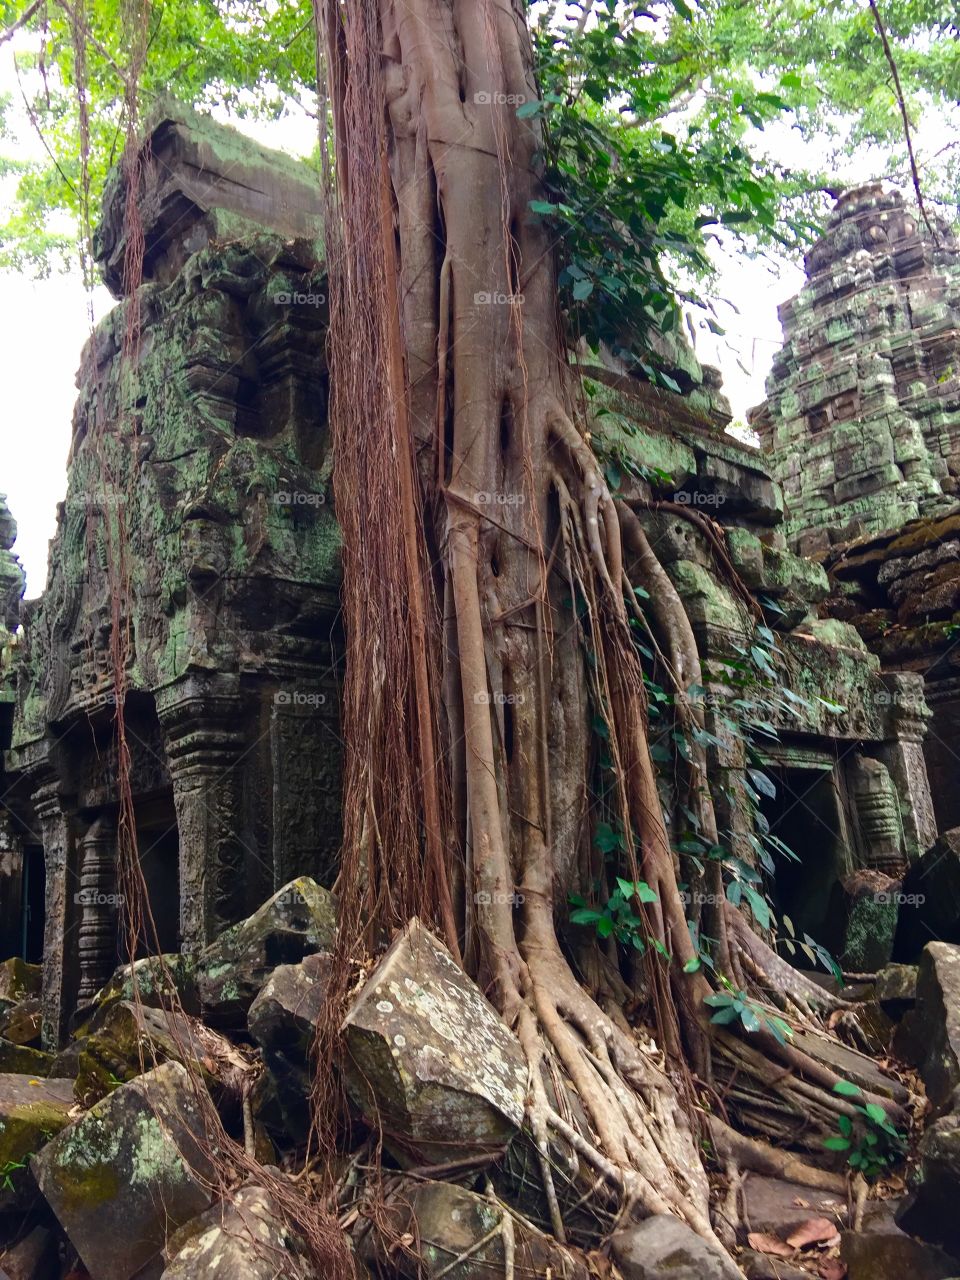 Tree over a temple in Angkor Archeological Site in Cambodia 